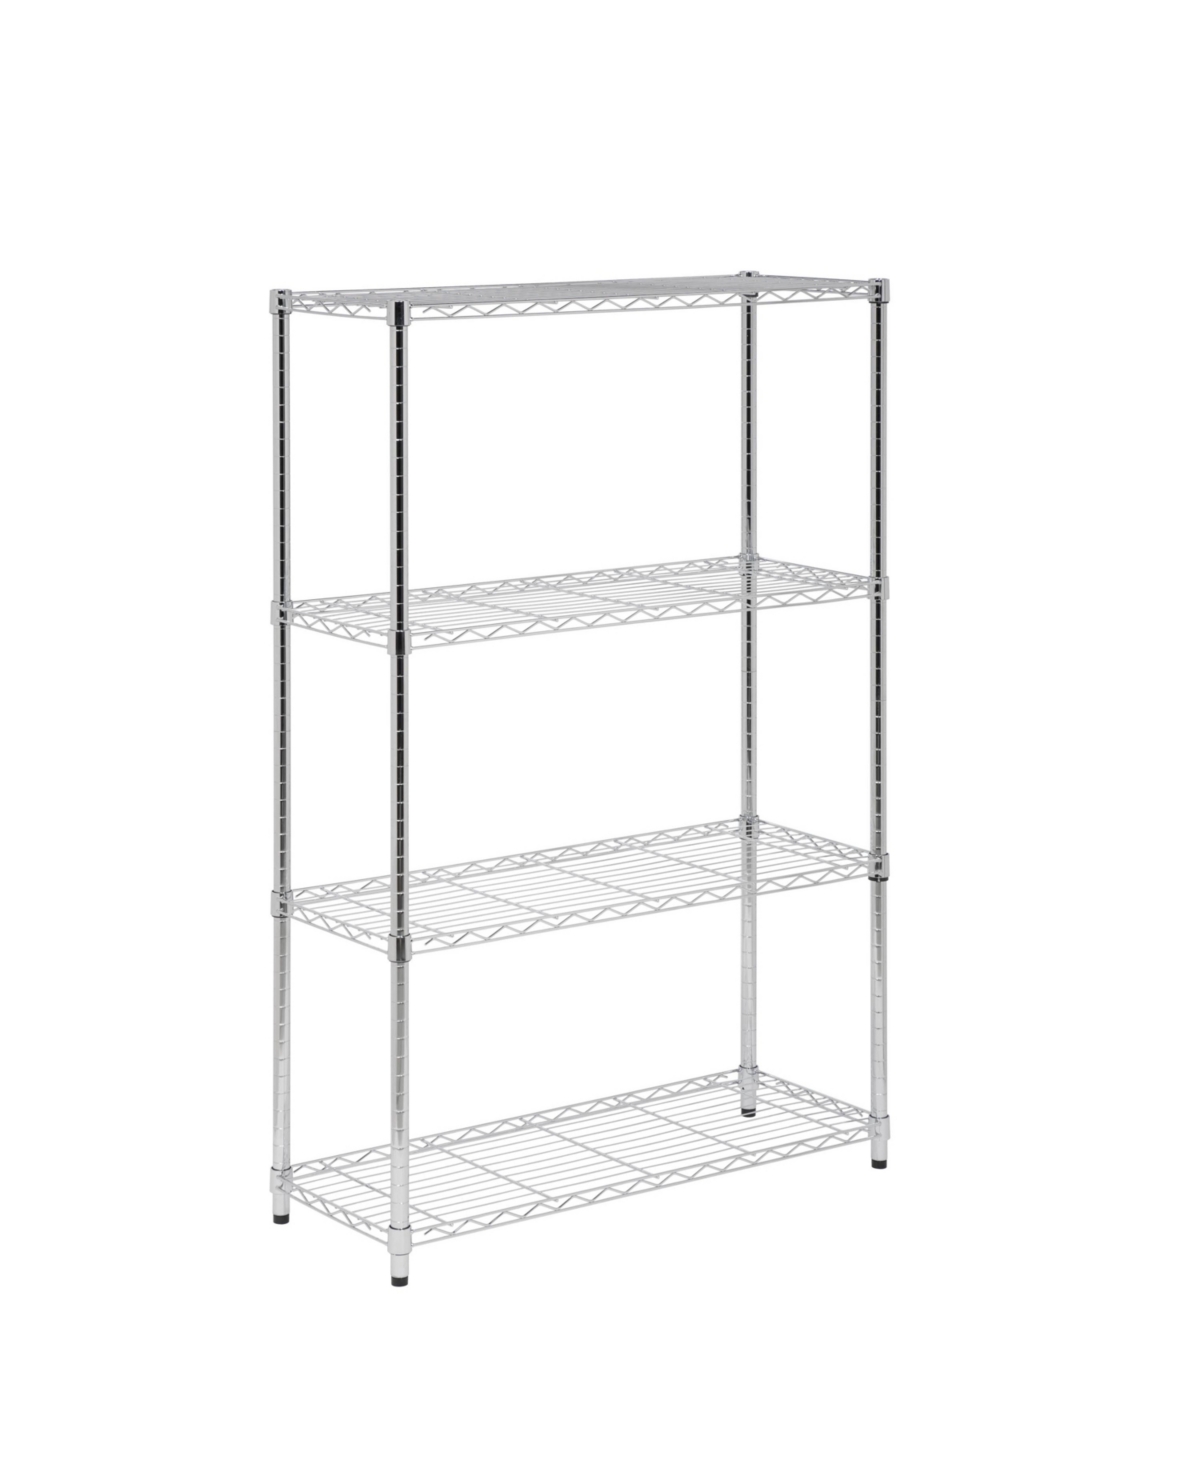 Honey Can Do Heavy Duty 4 Tier Adjustable Shelving Unit In Chrome